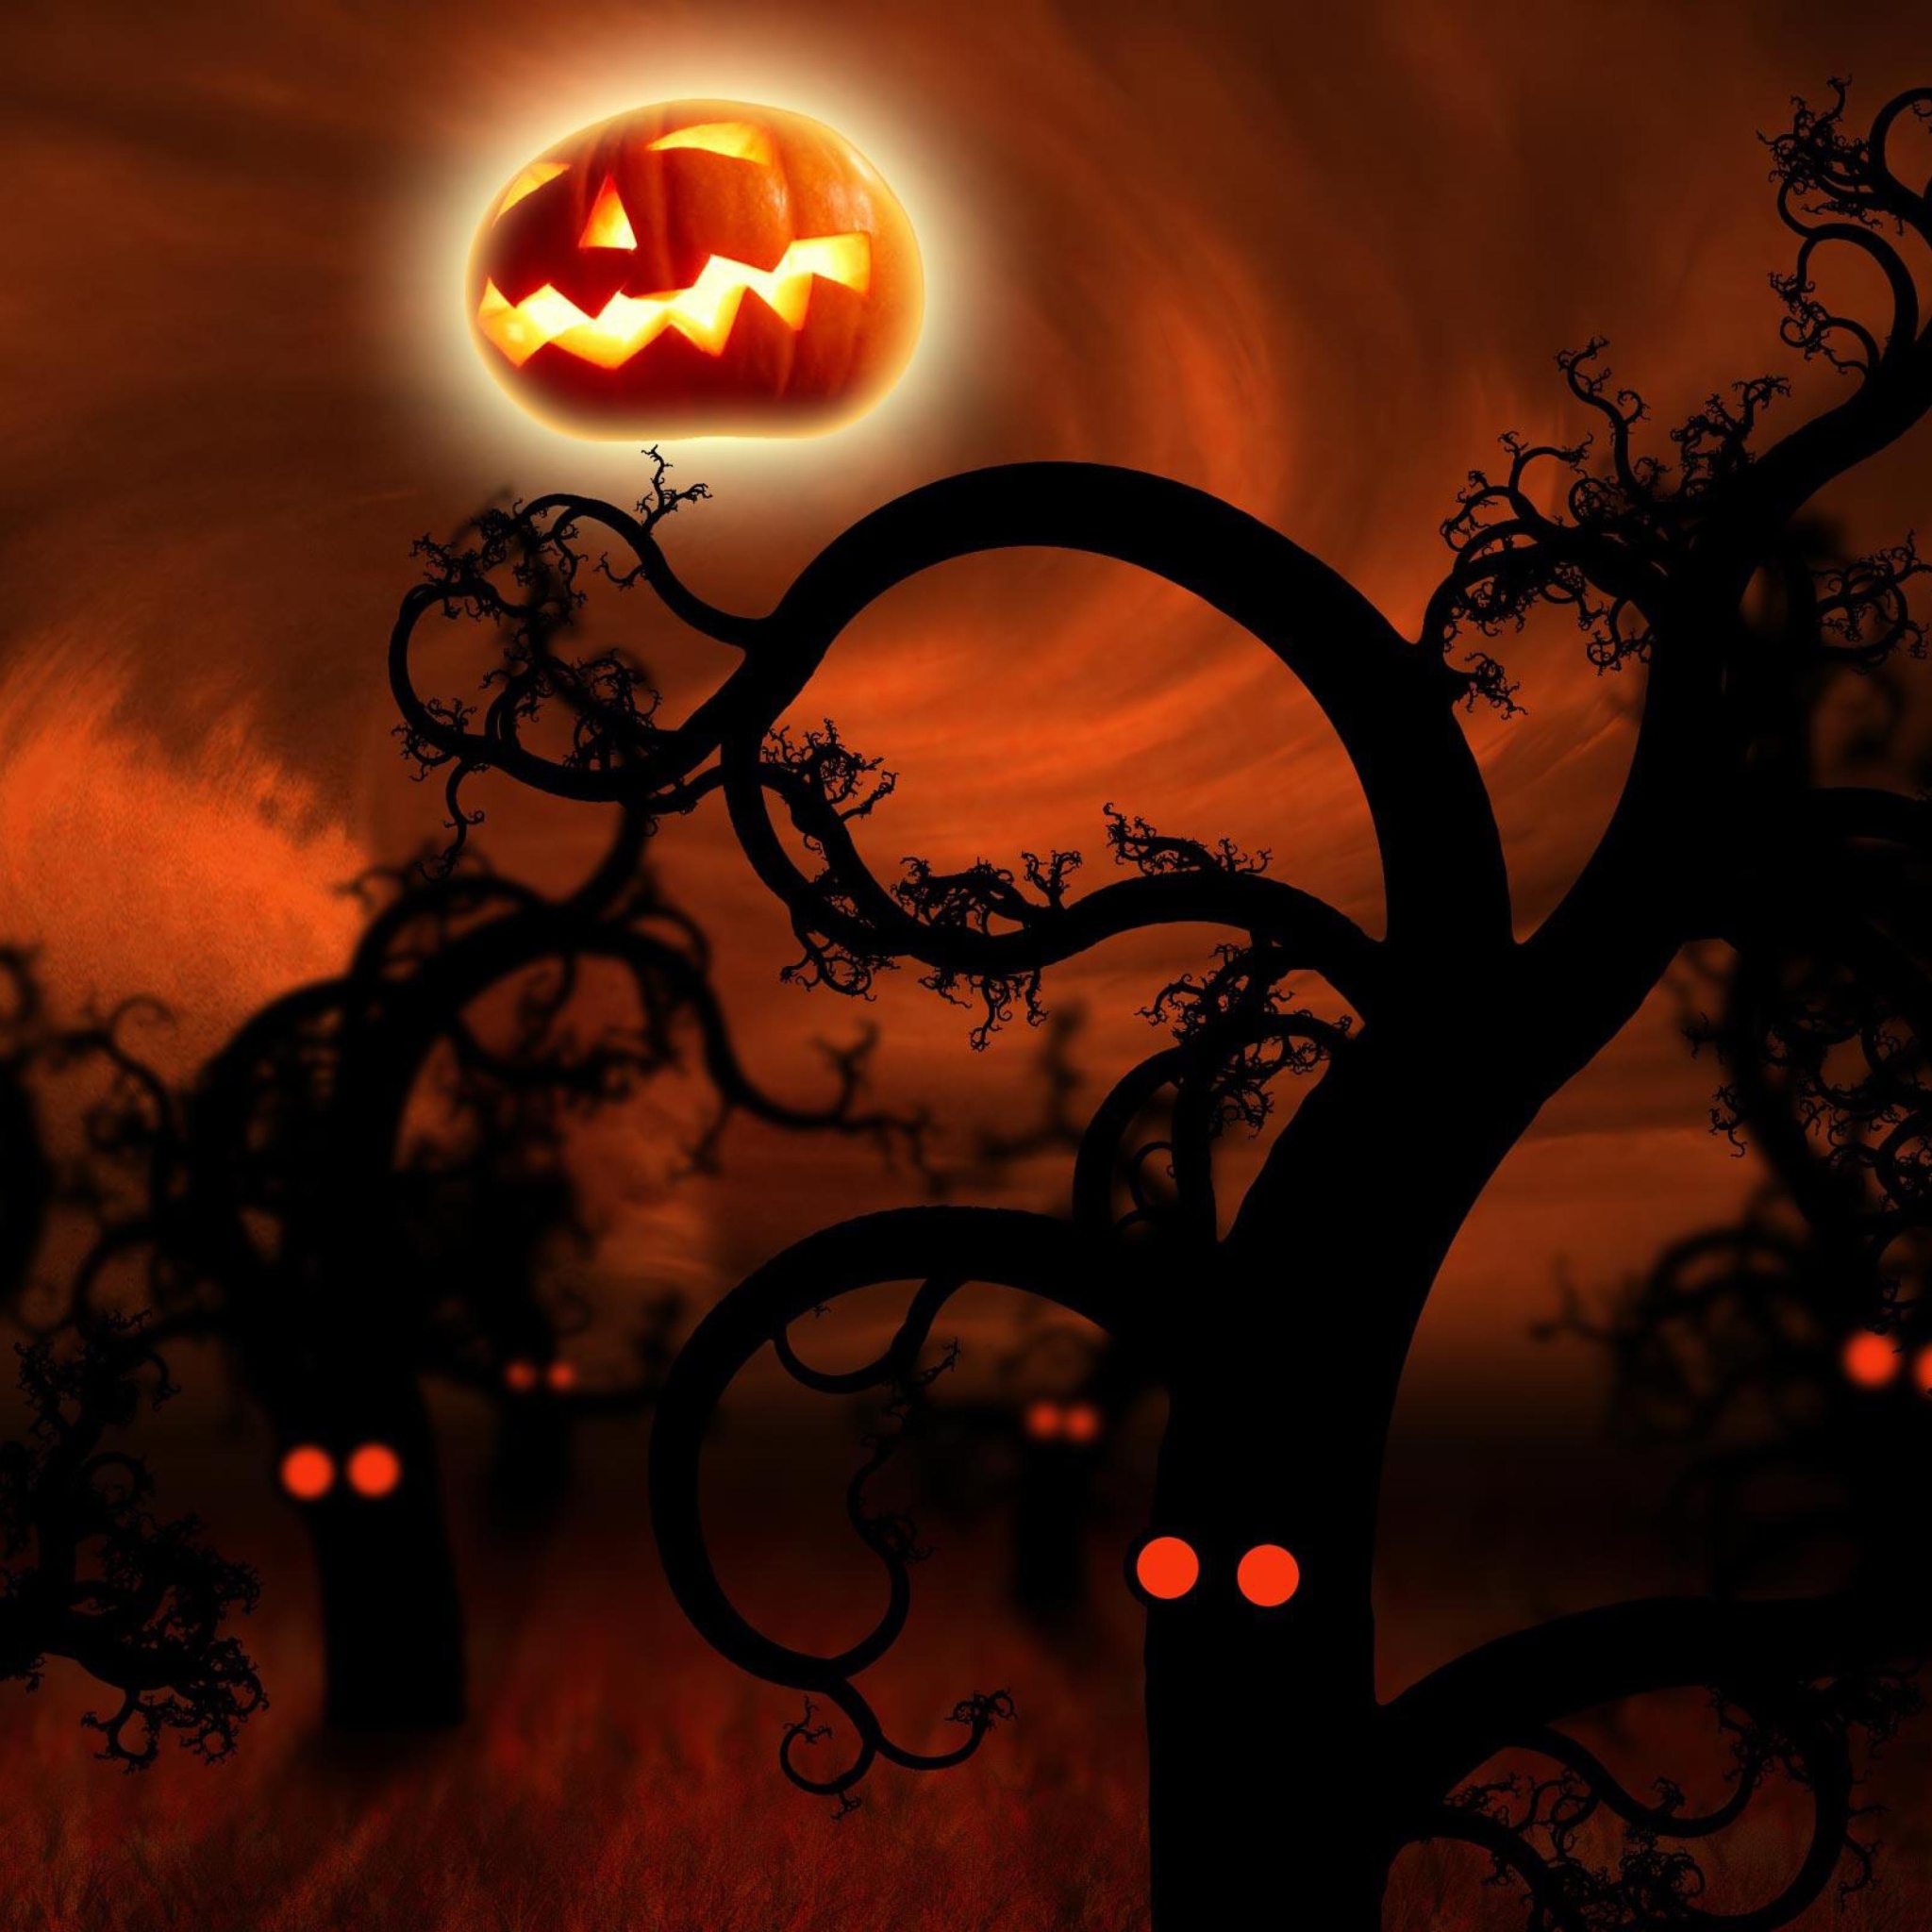 Halloween Night And Costumes wallpaper 2048x2048